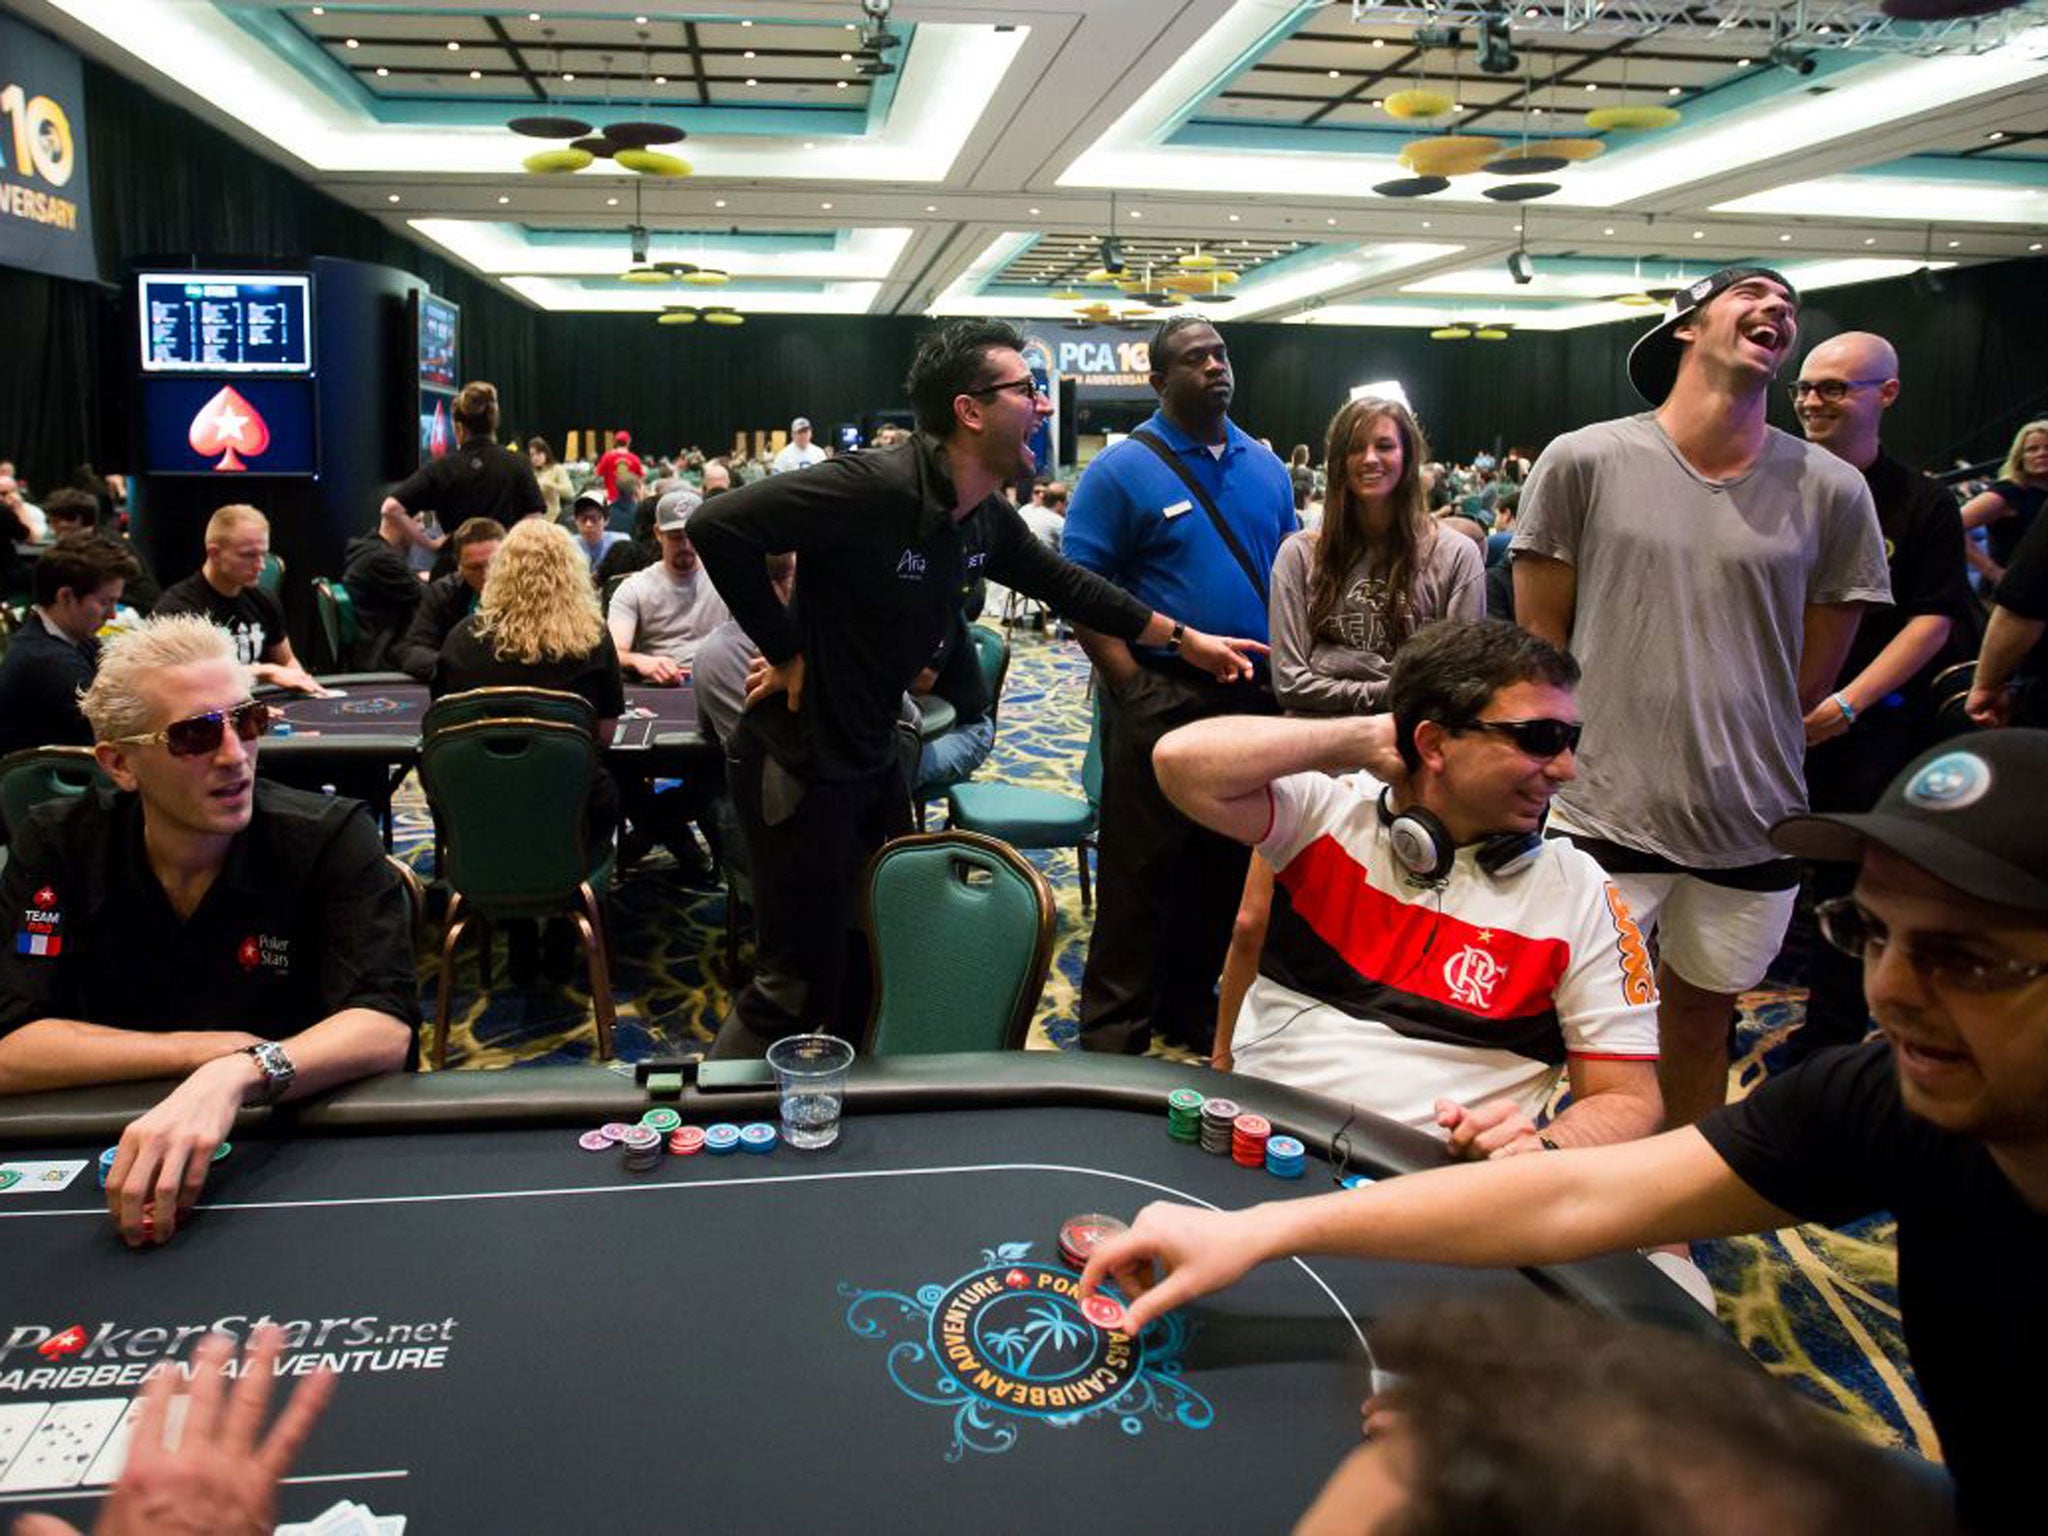 Olympic swimmer Michael Phelps (standing, right) who played at the PokerStars ‘main event'